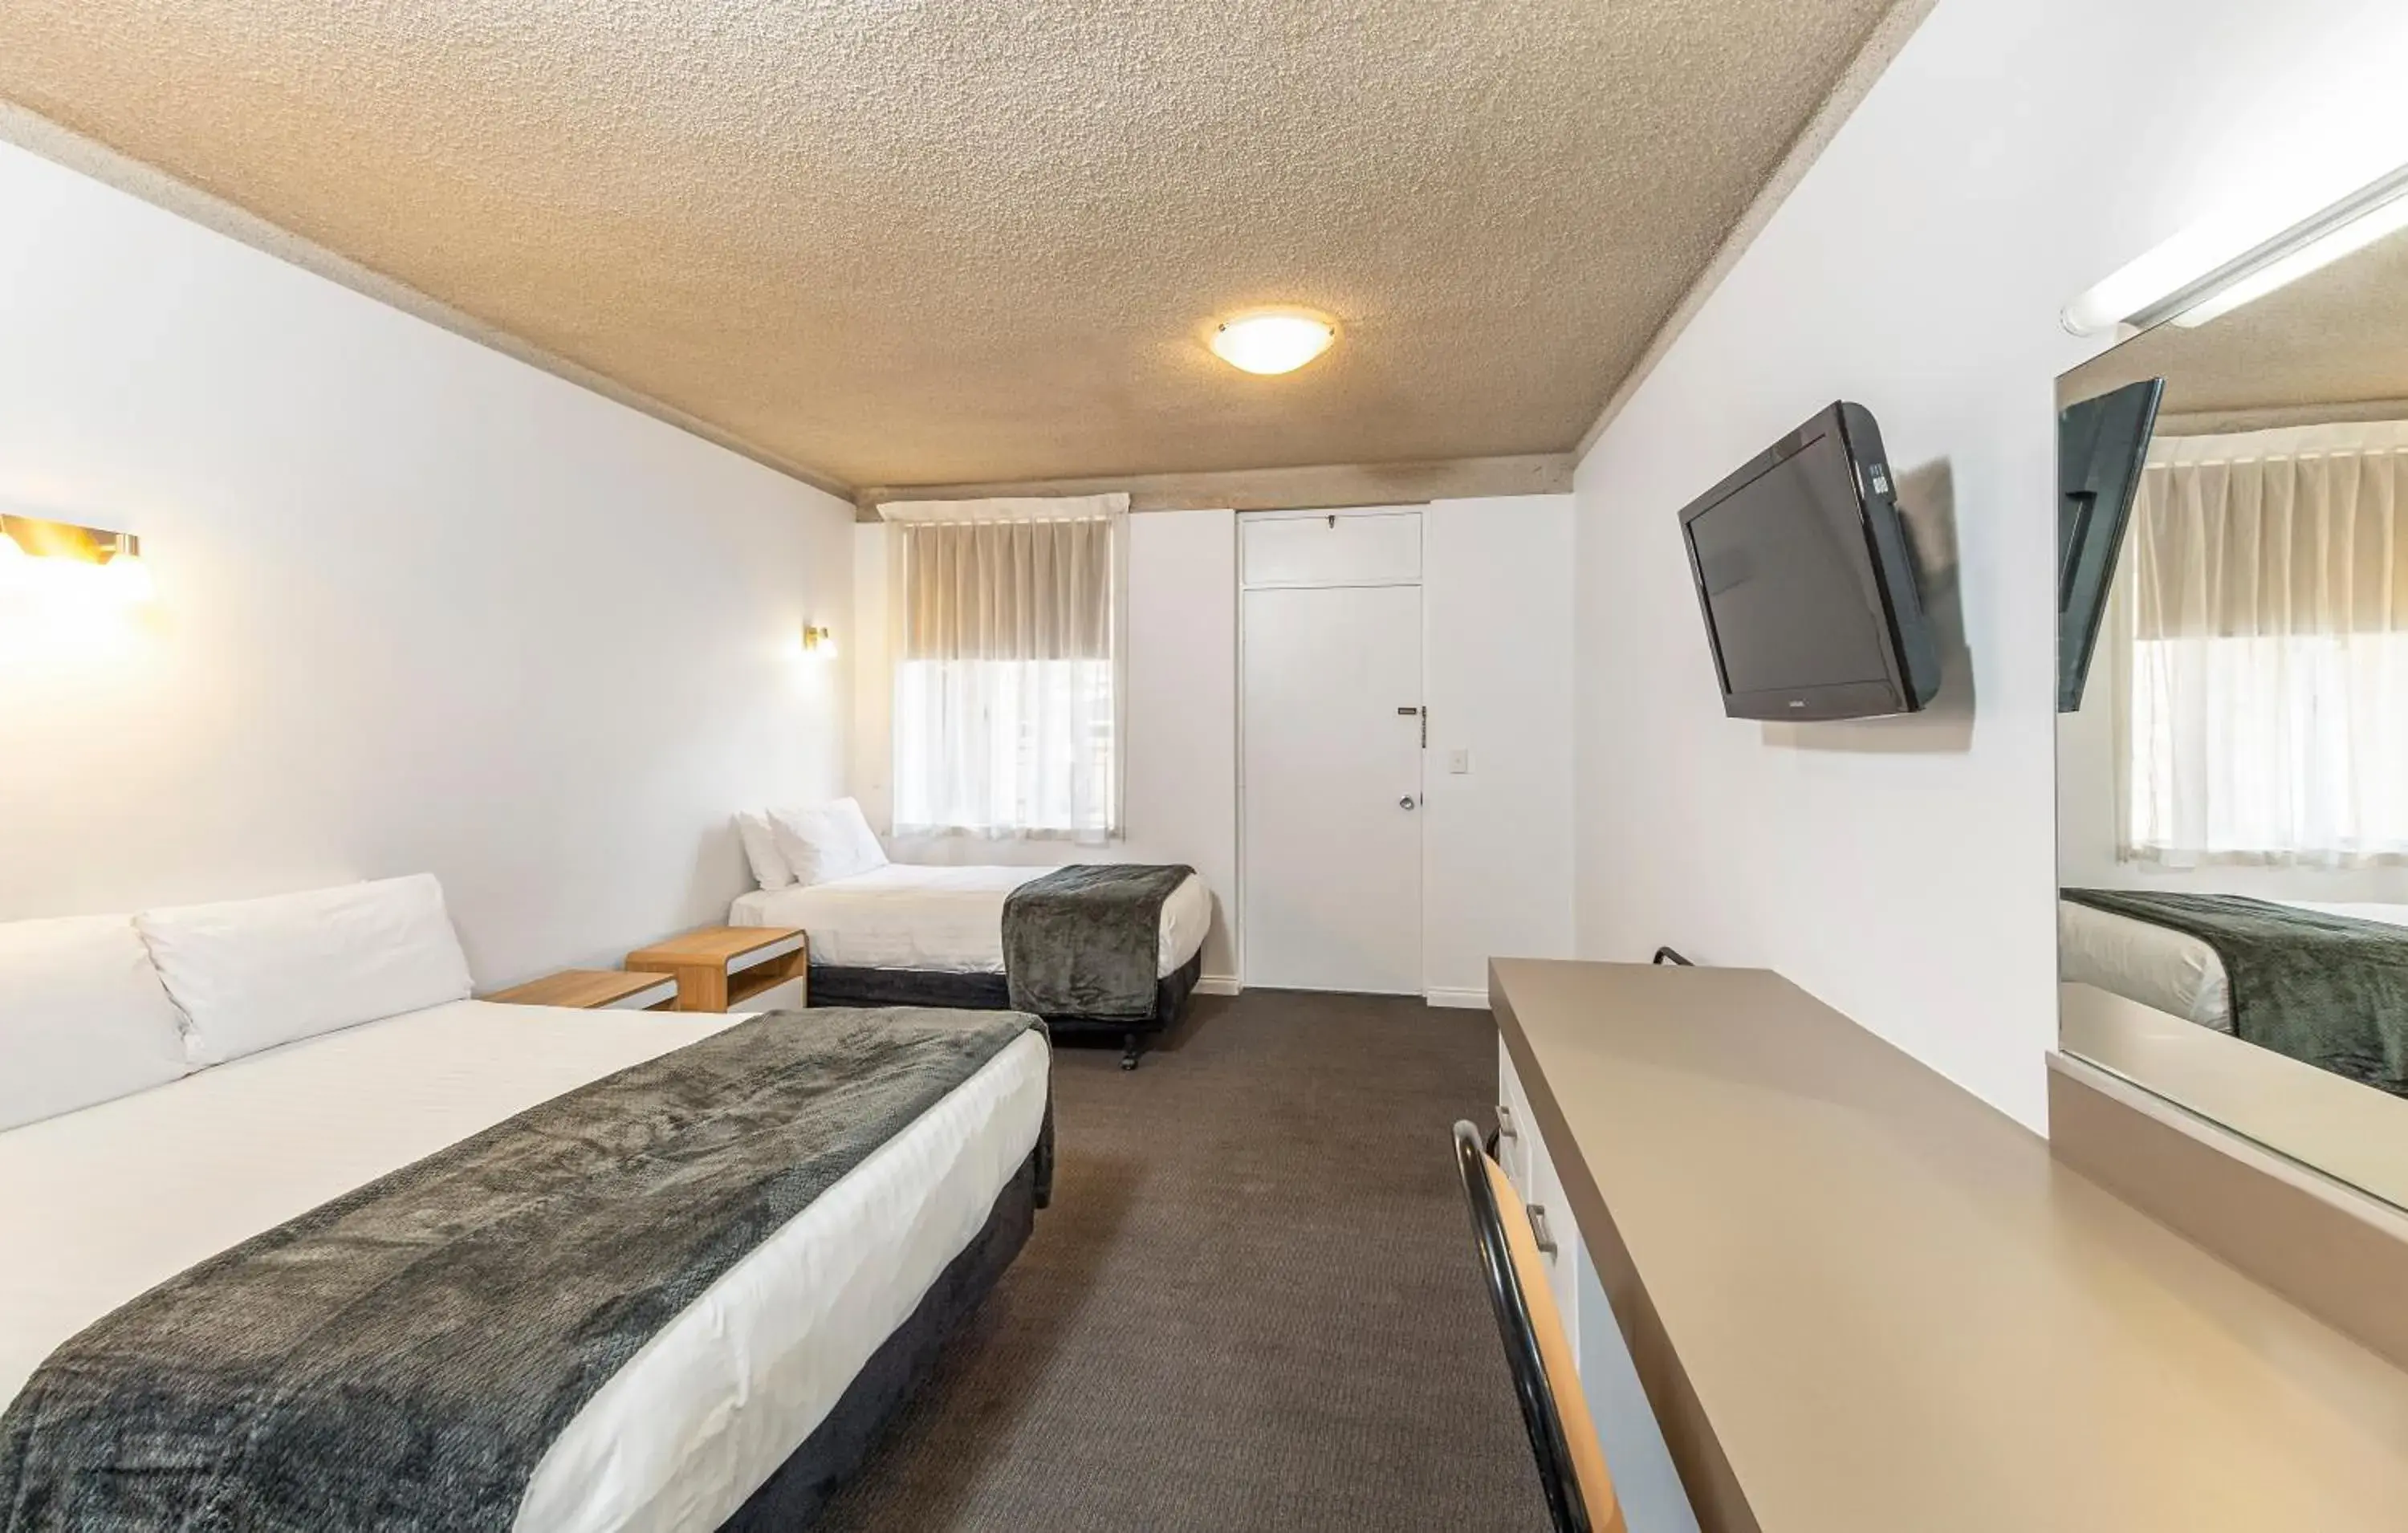 Standard Double Room in Econo Lodge East Adelaide